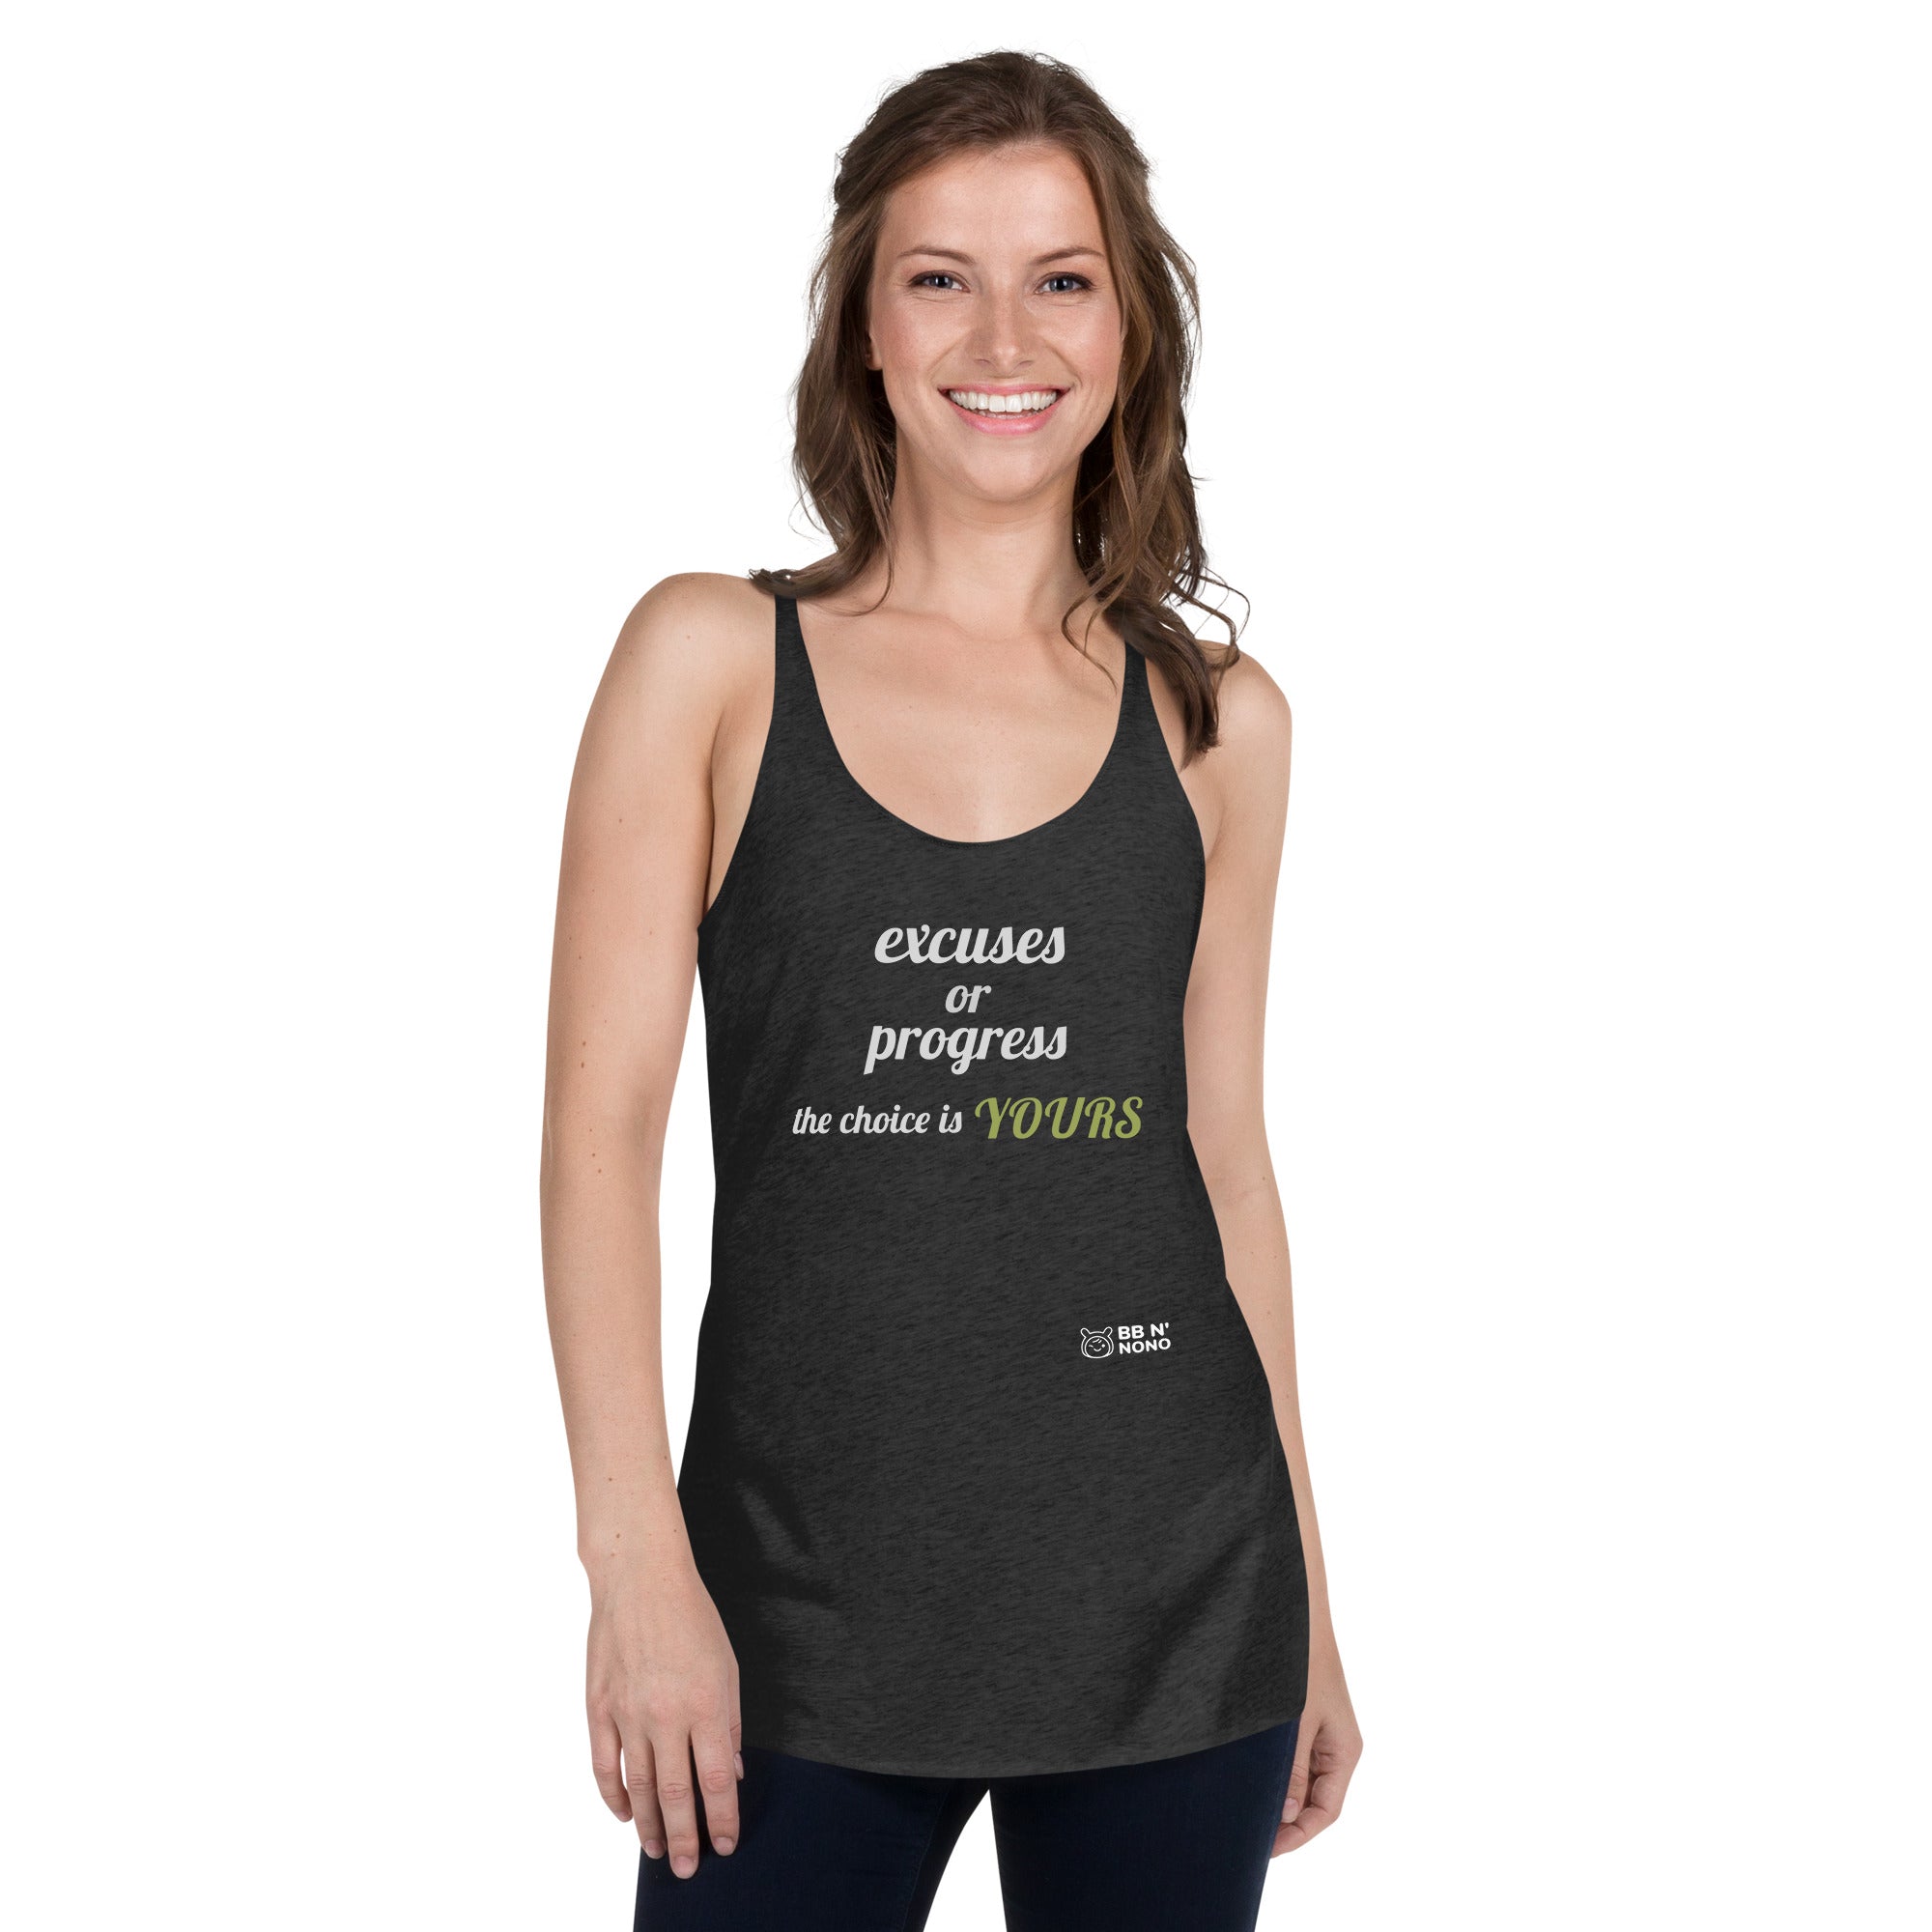 Excuses or Progress, the choice is yours V - Women's Racerback Tank